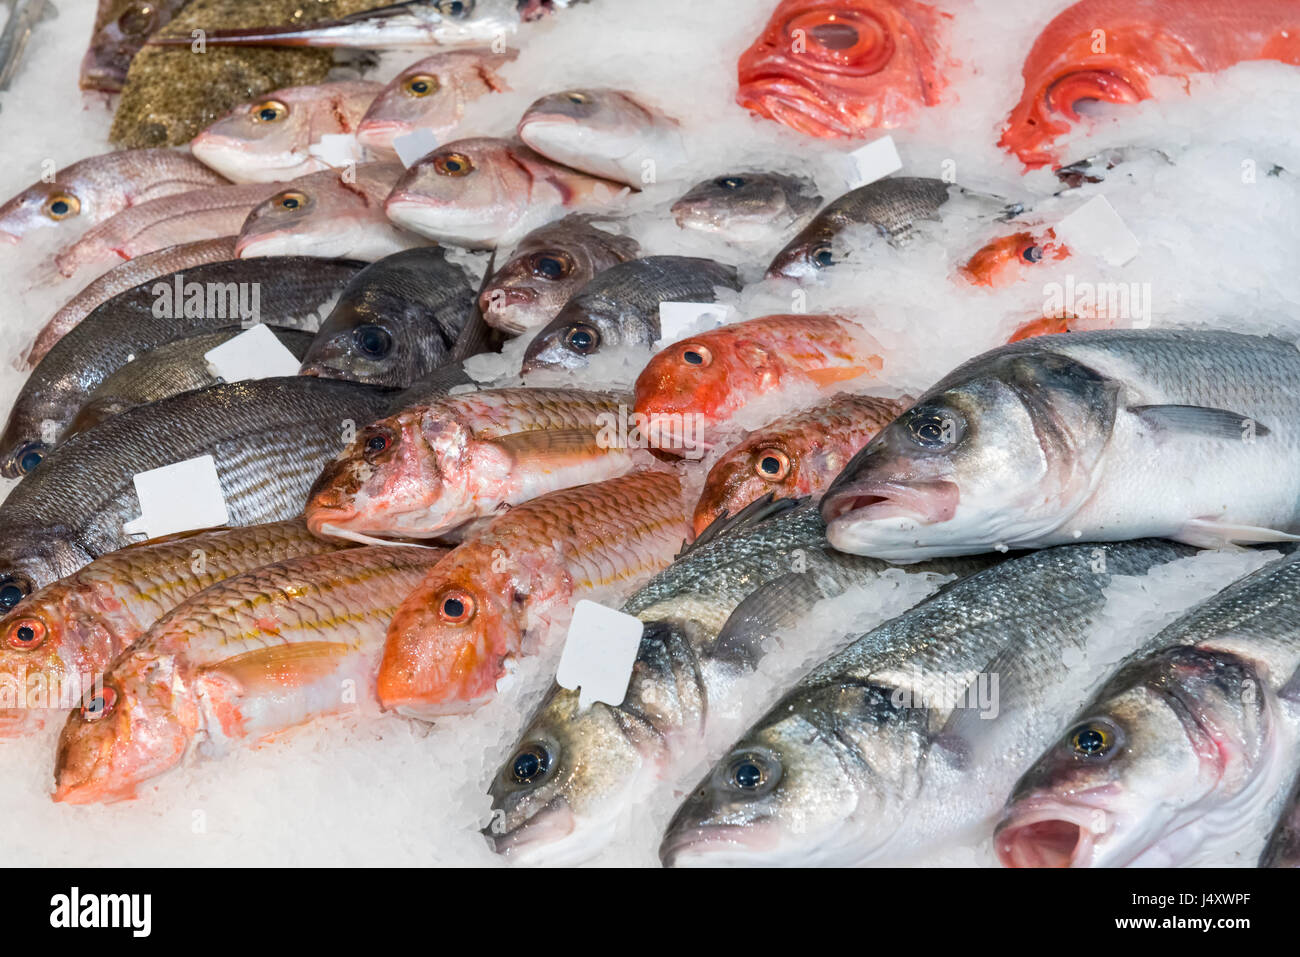 Fine fish on ice for sale at a market Stock Photo